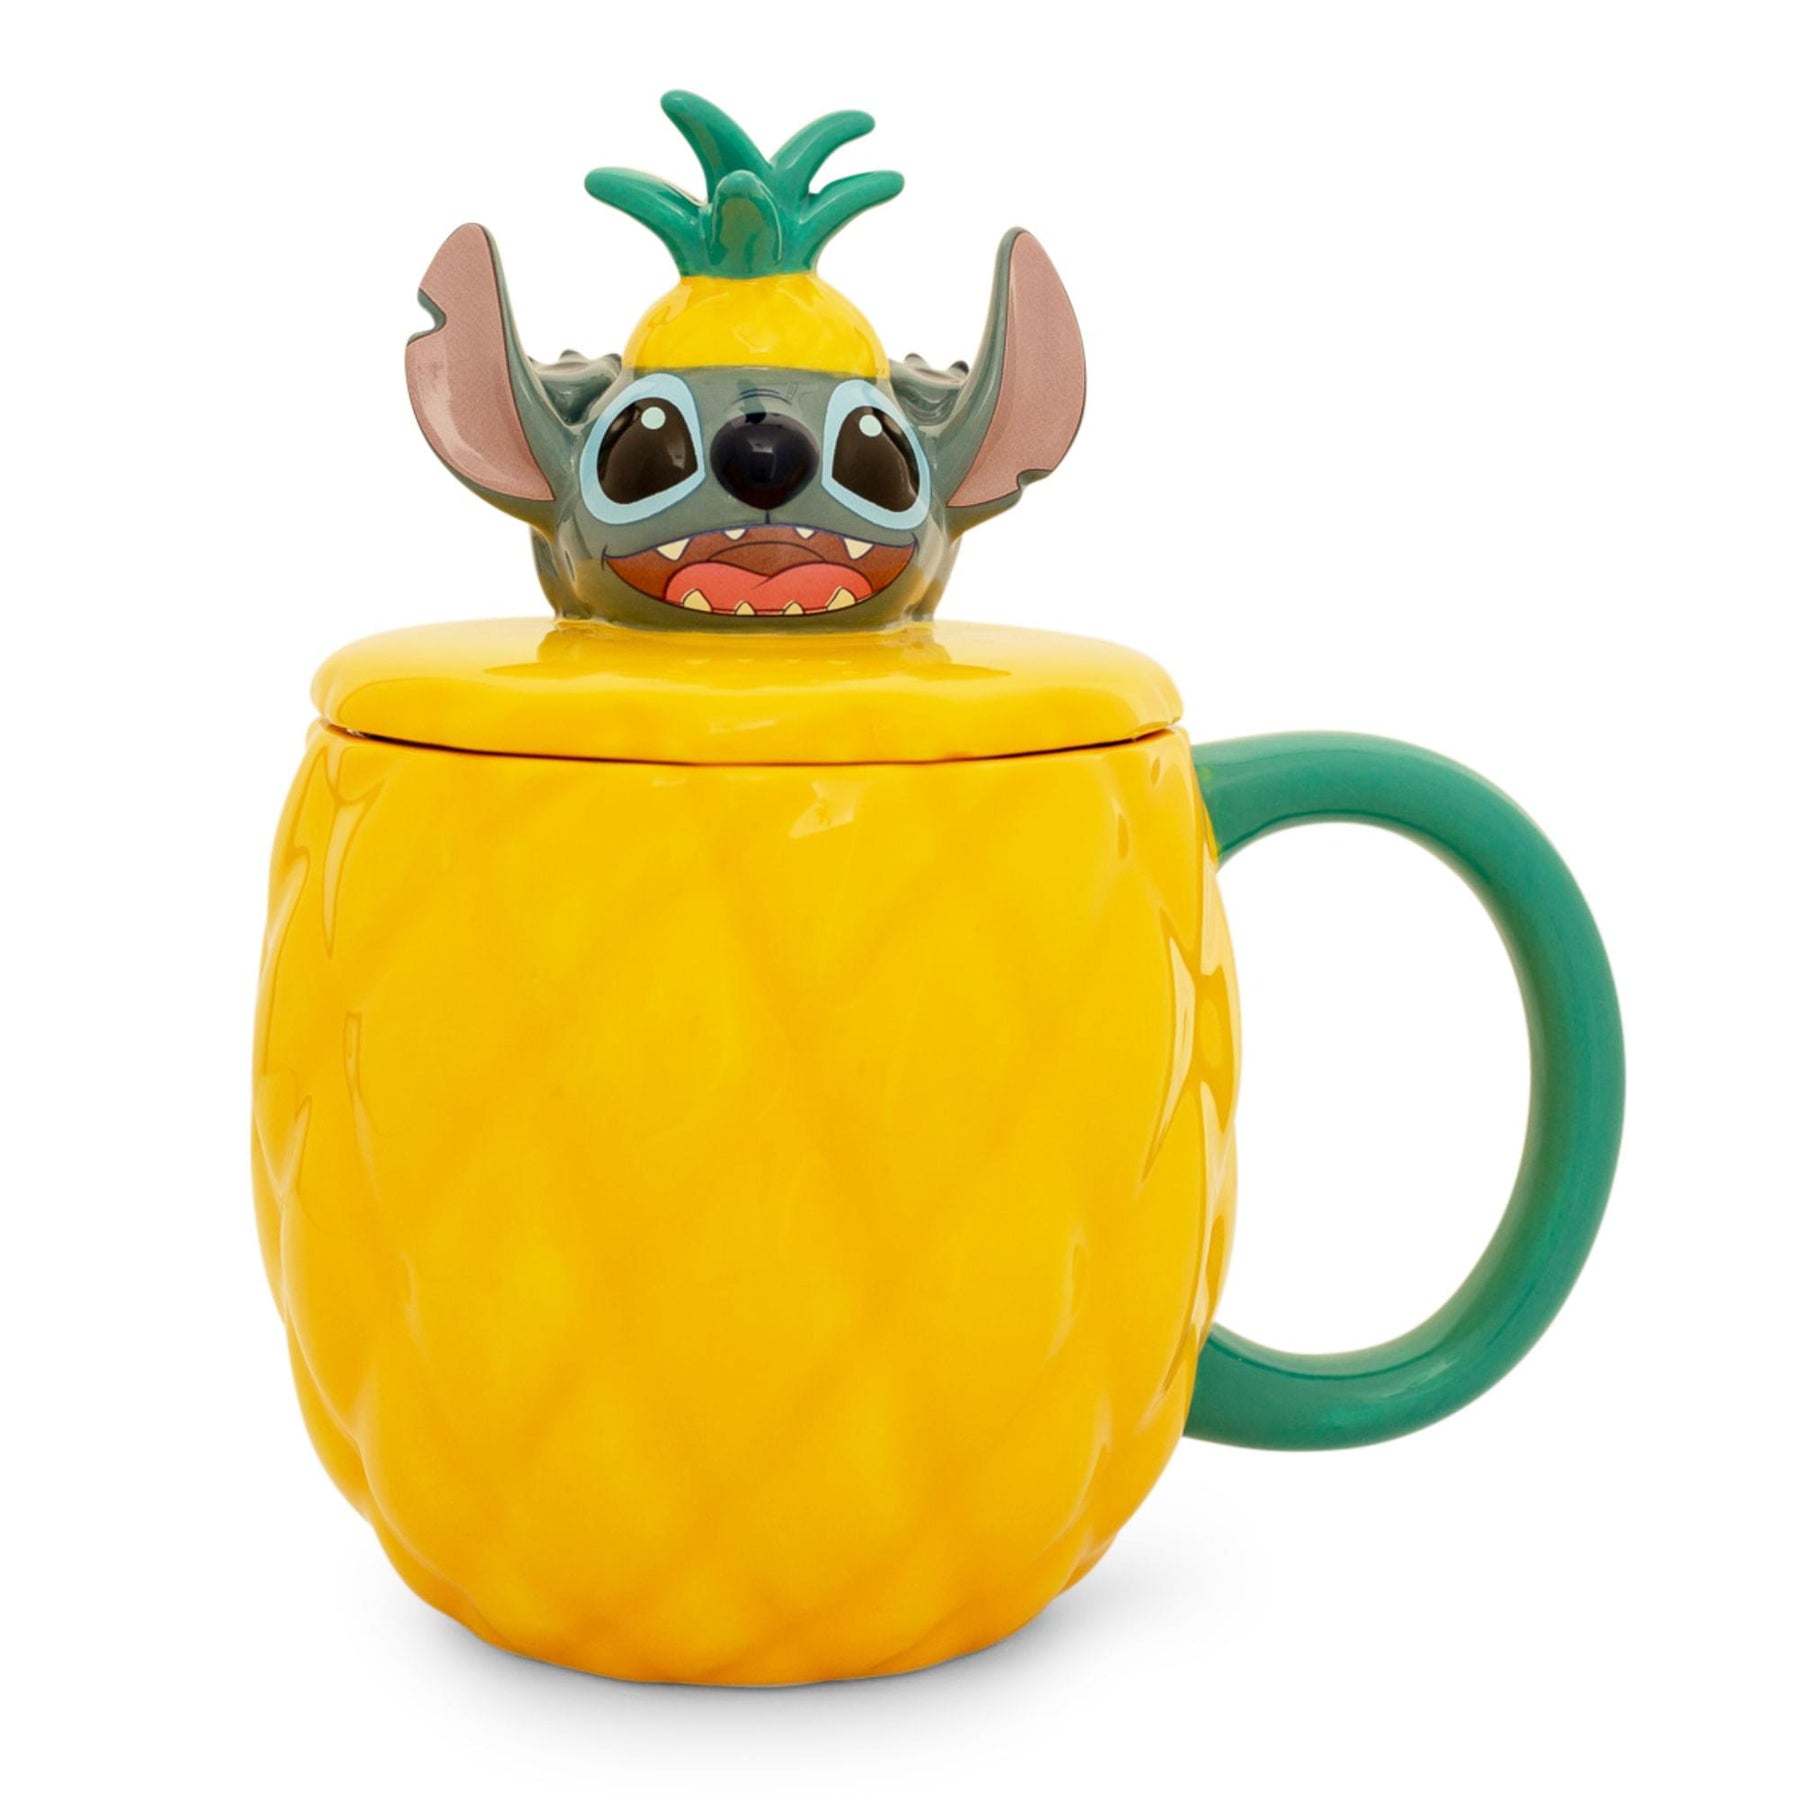 Disney Lilo & Stitch Pineapple 3D Sculpted Ceramic Mug With Lid | Holds 20 Ounce